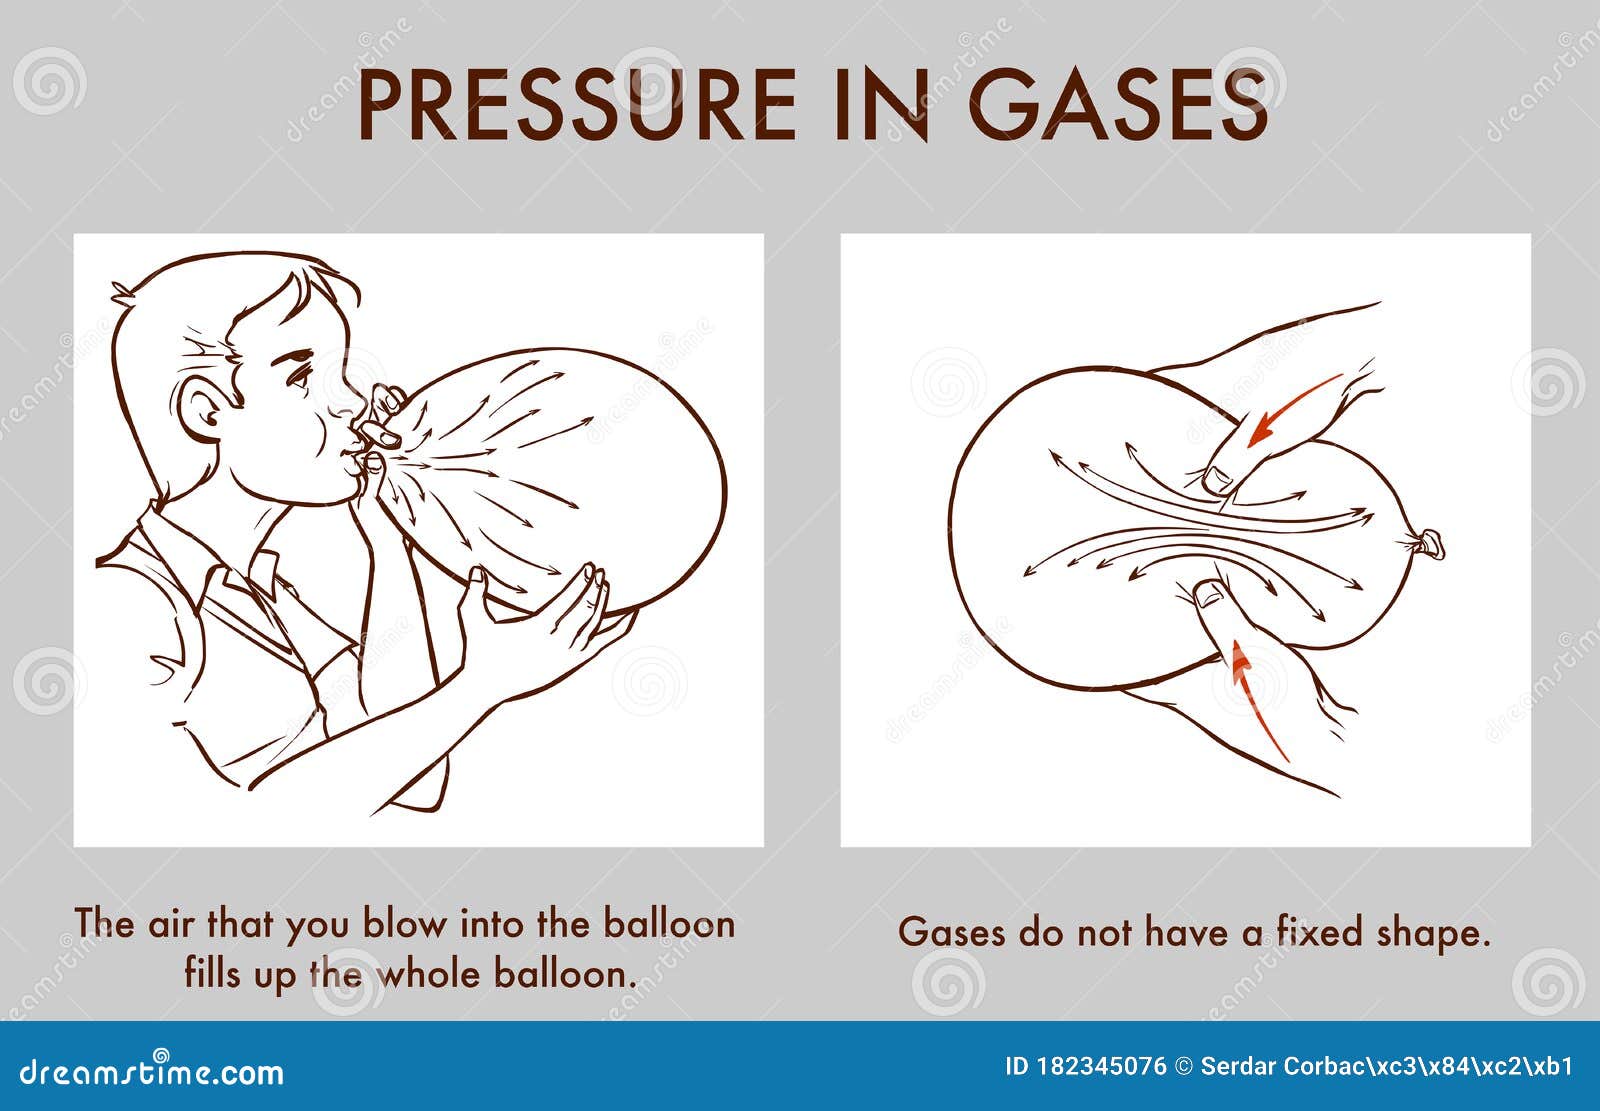   of a pressure in gases